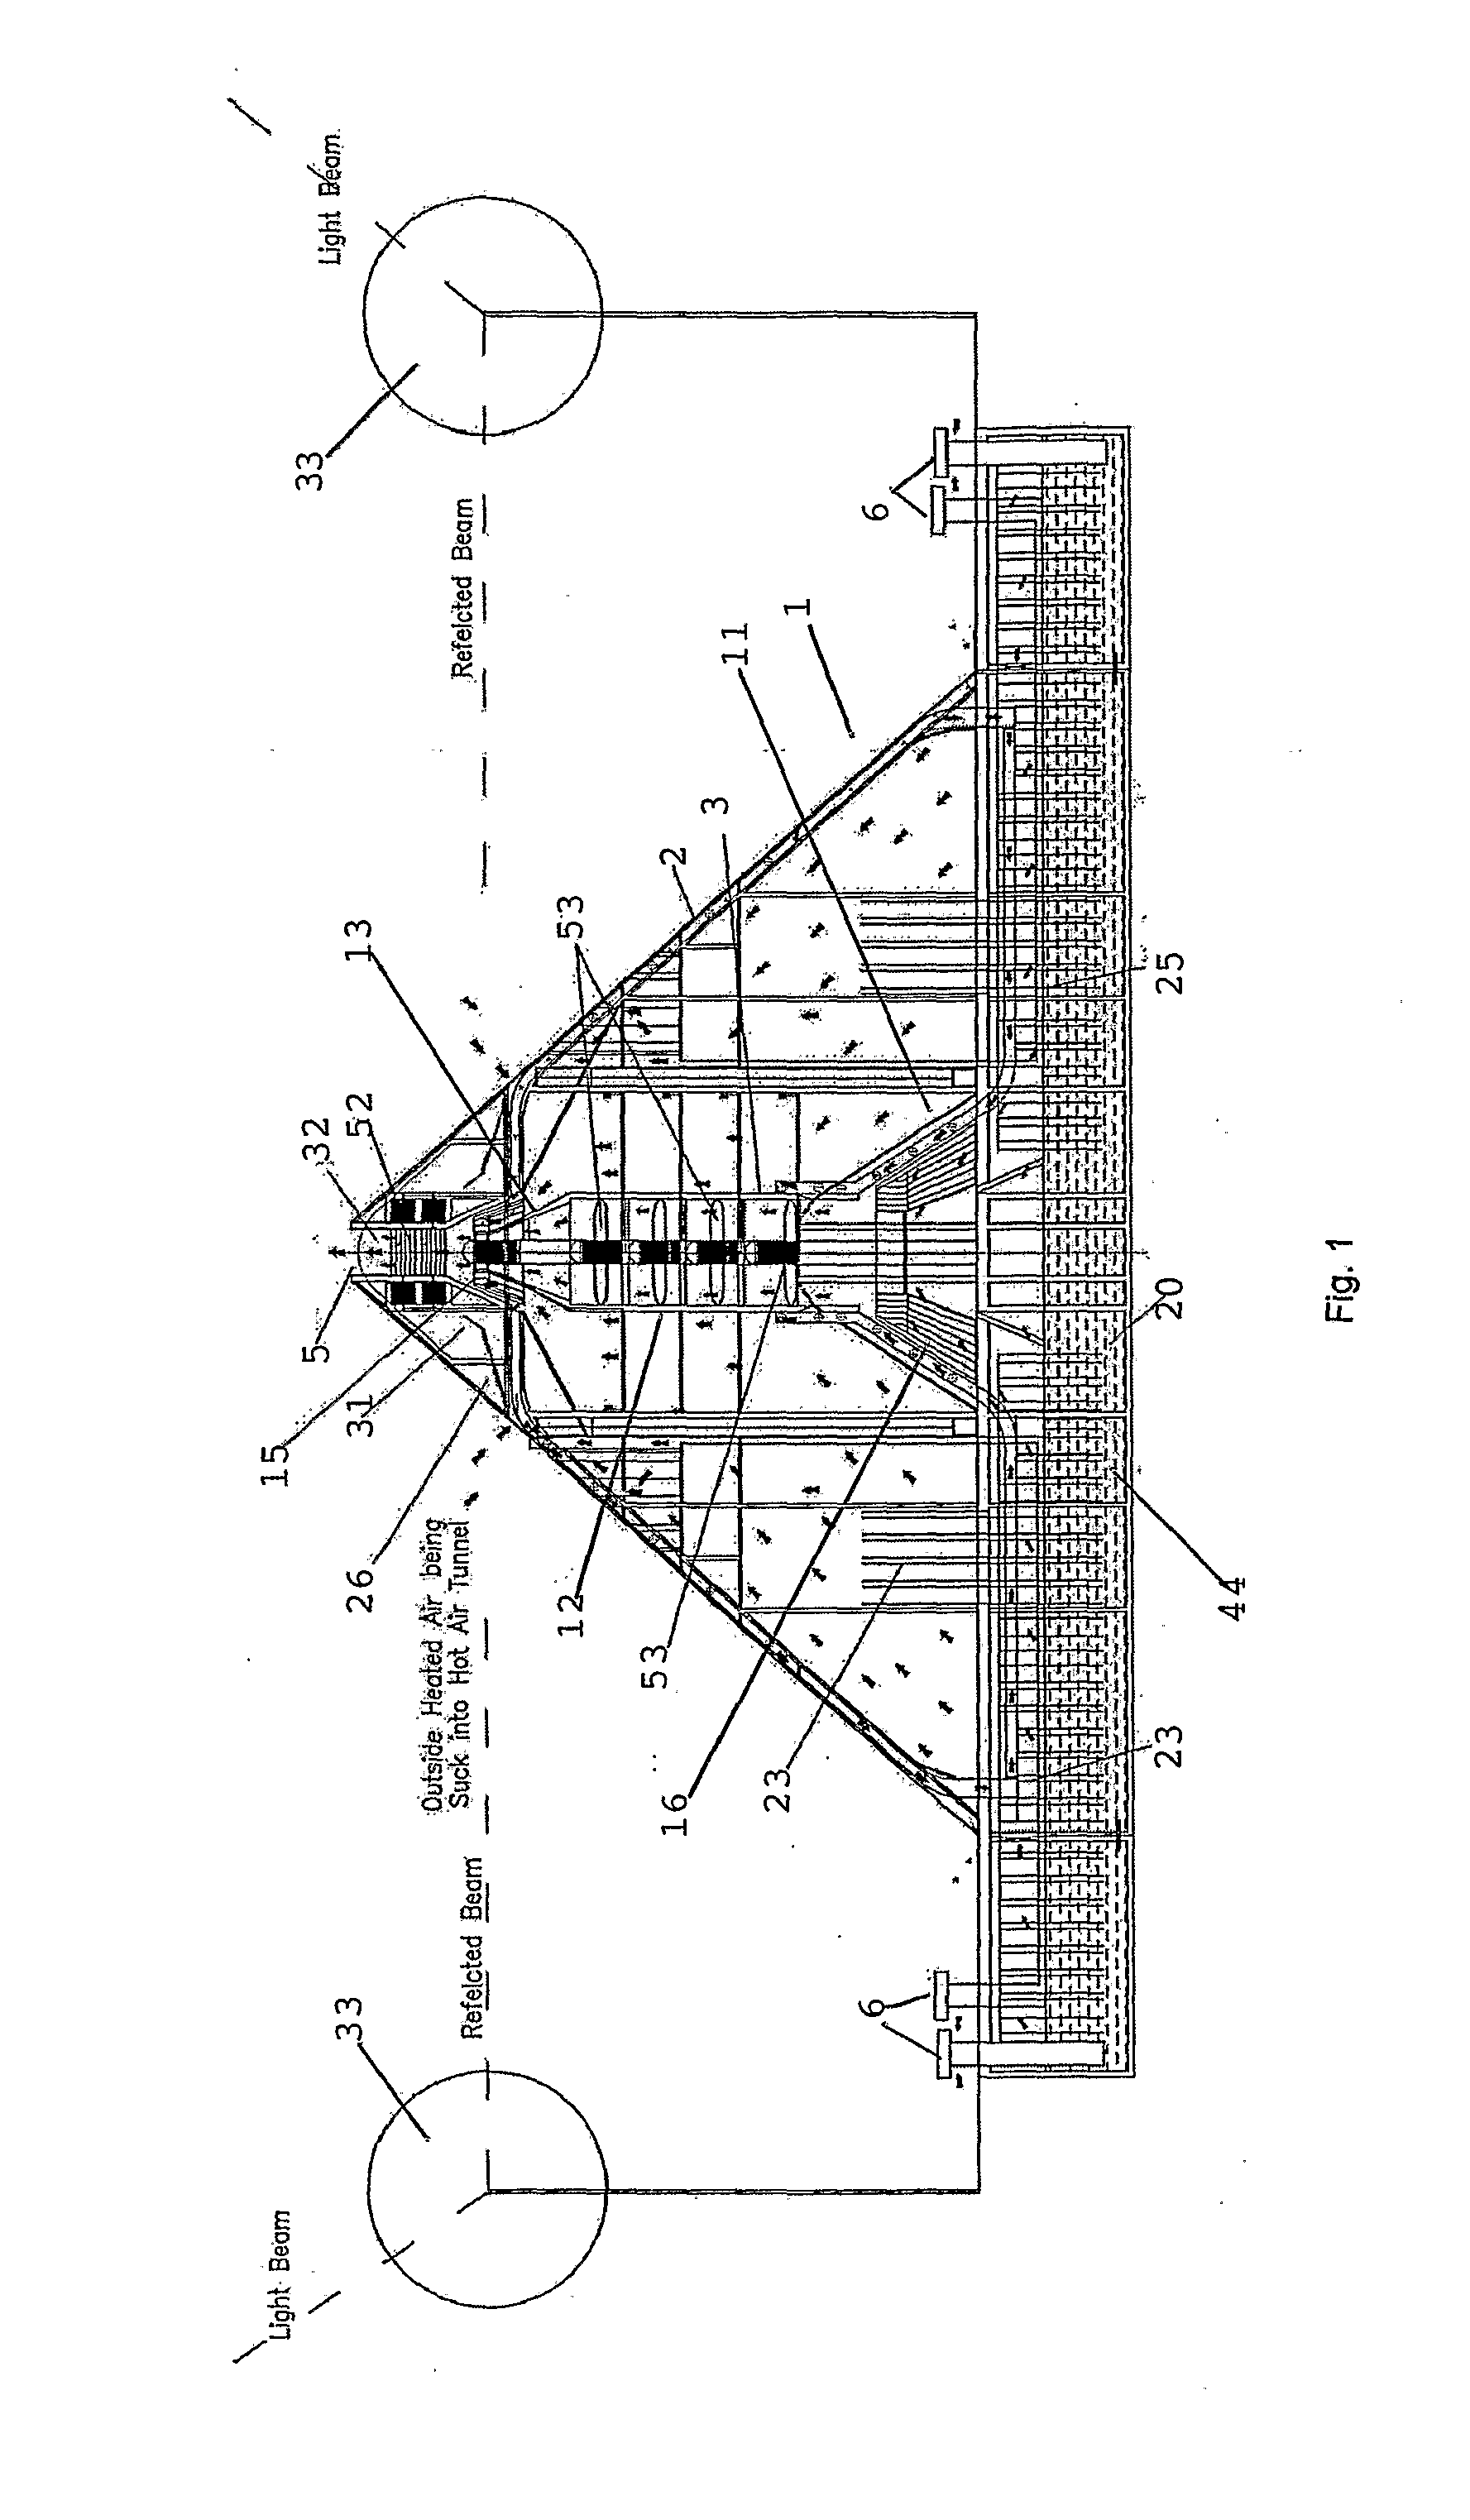 Structure and Methods Using Multi-Systems for Electricity Generation and Water Desalination